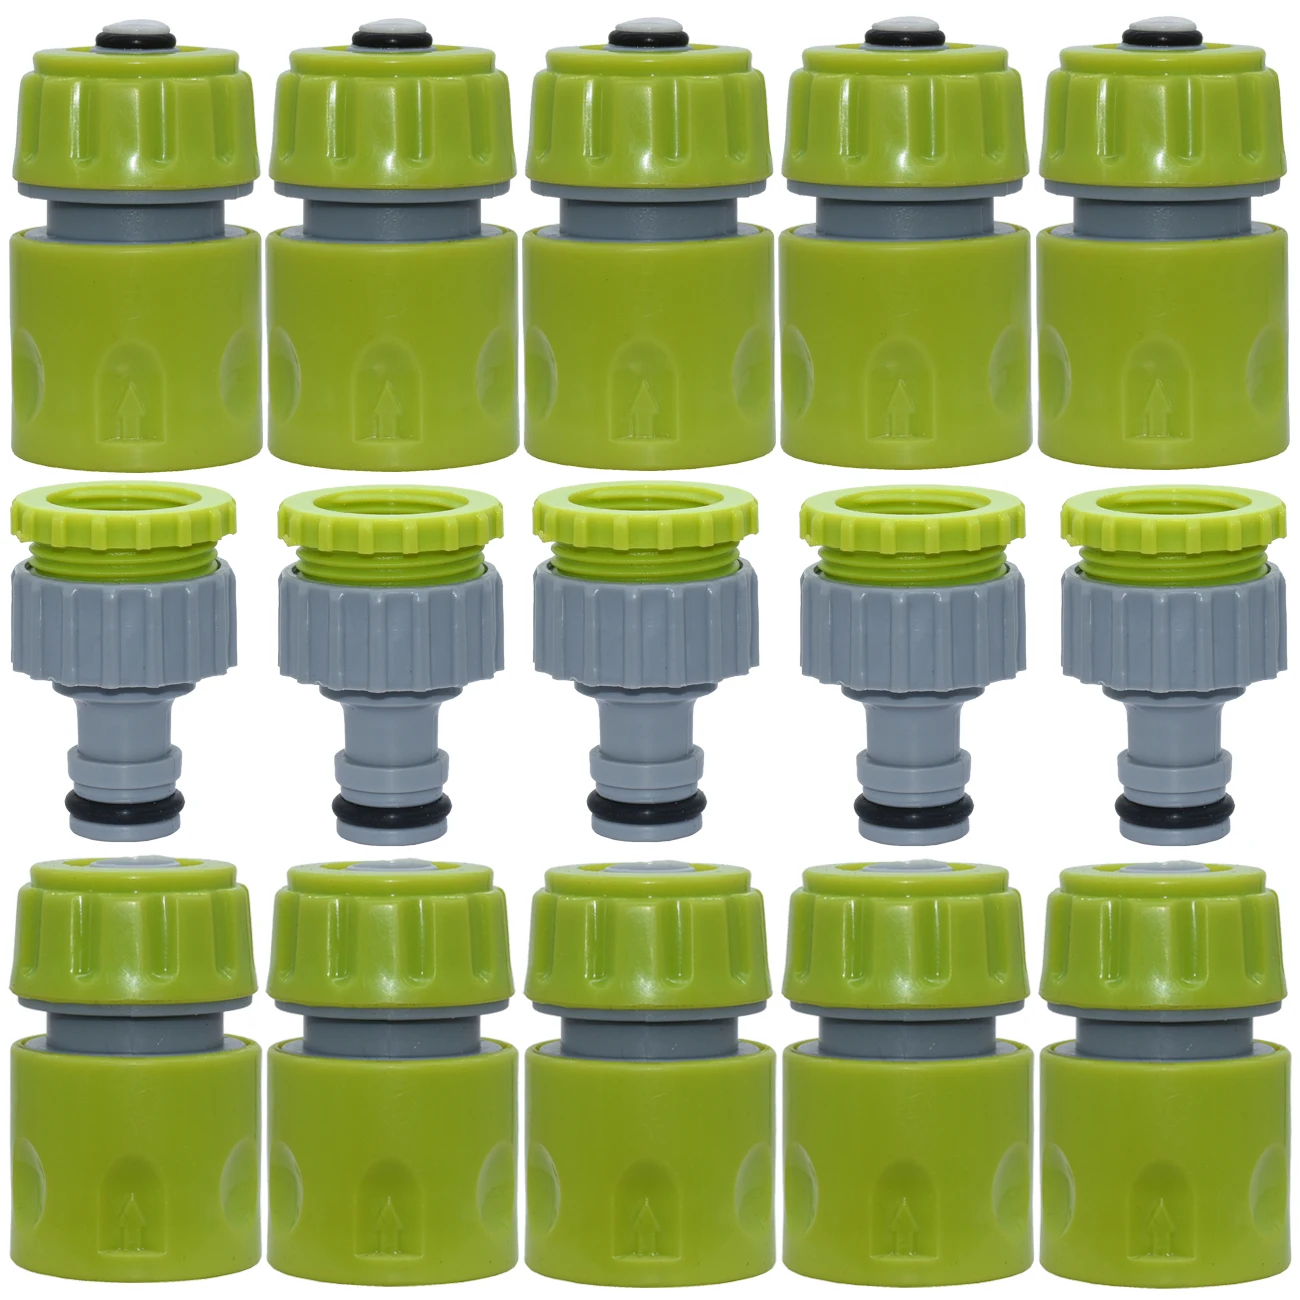 KESLA 10PCS 16mm Hose Garden Tap Water Hose Pipe 1/2 inch Connector Quick Connect Adapter Fitting Repair Watering Greenhouse 10pcs 1 2 inch hose garden tap water hose pipe connector quick connect adapter fitting watering